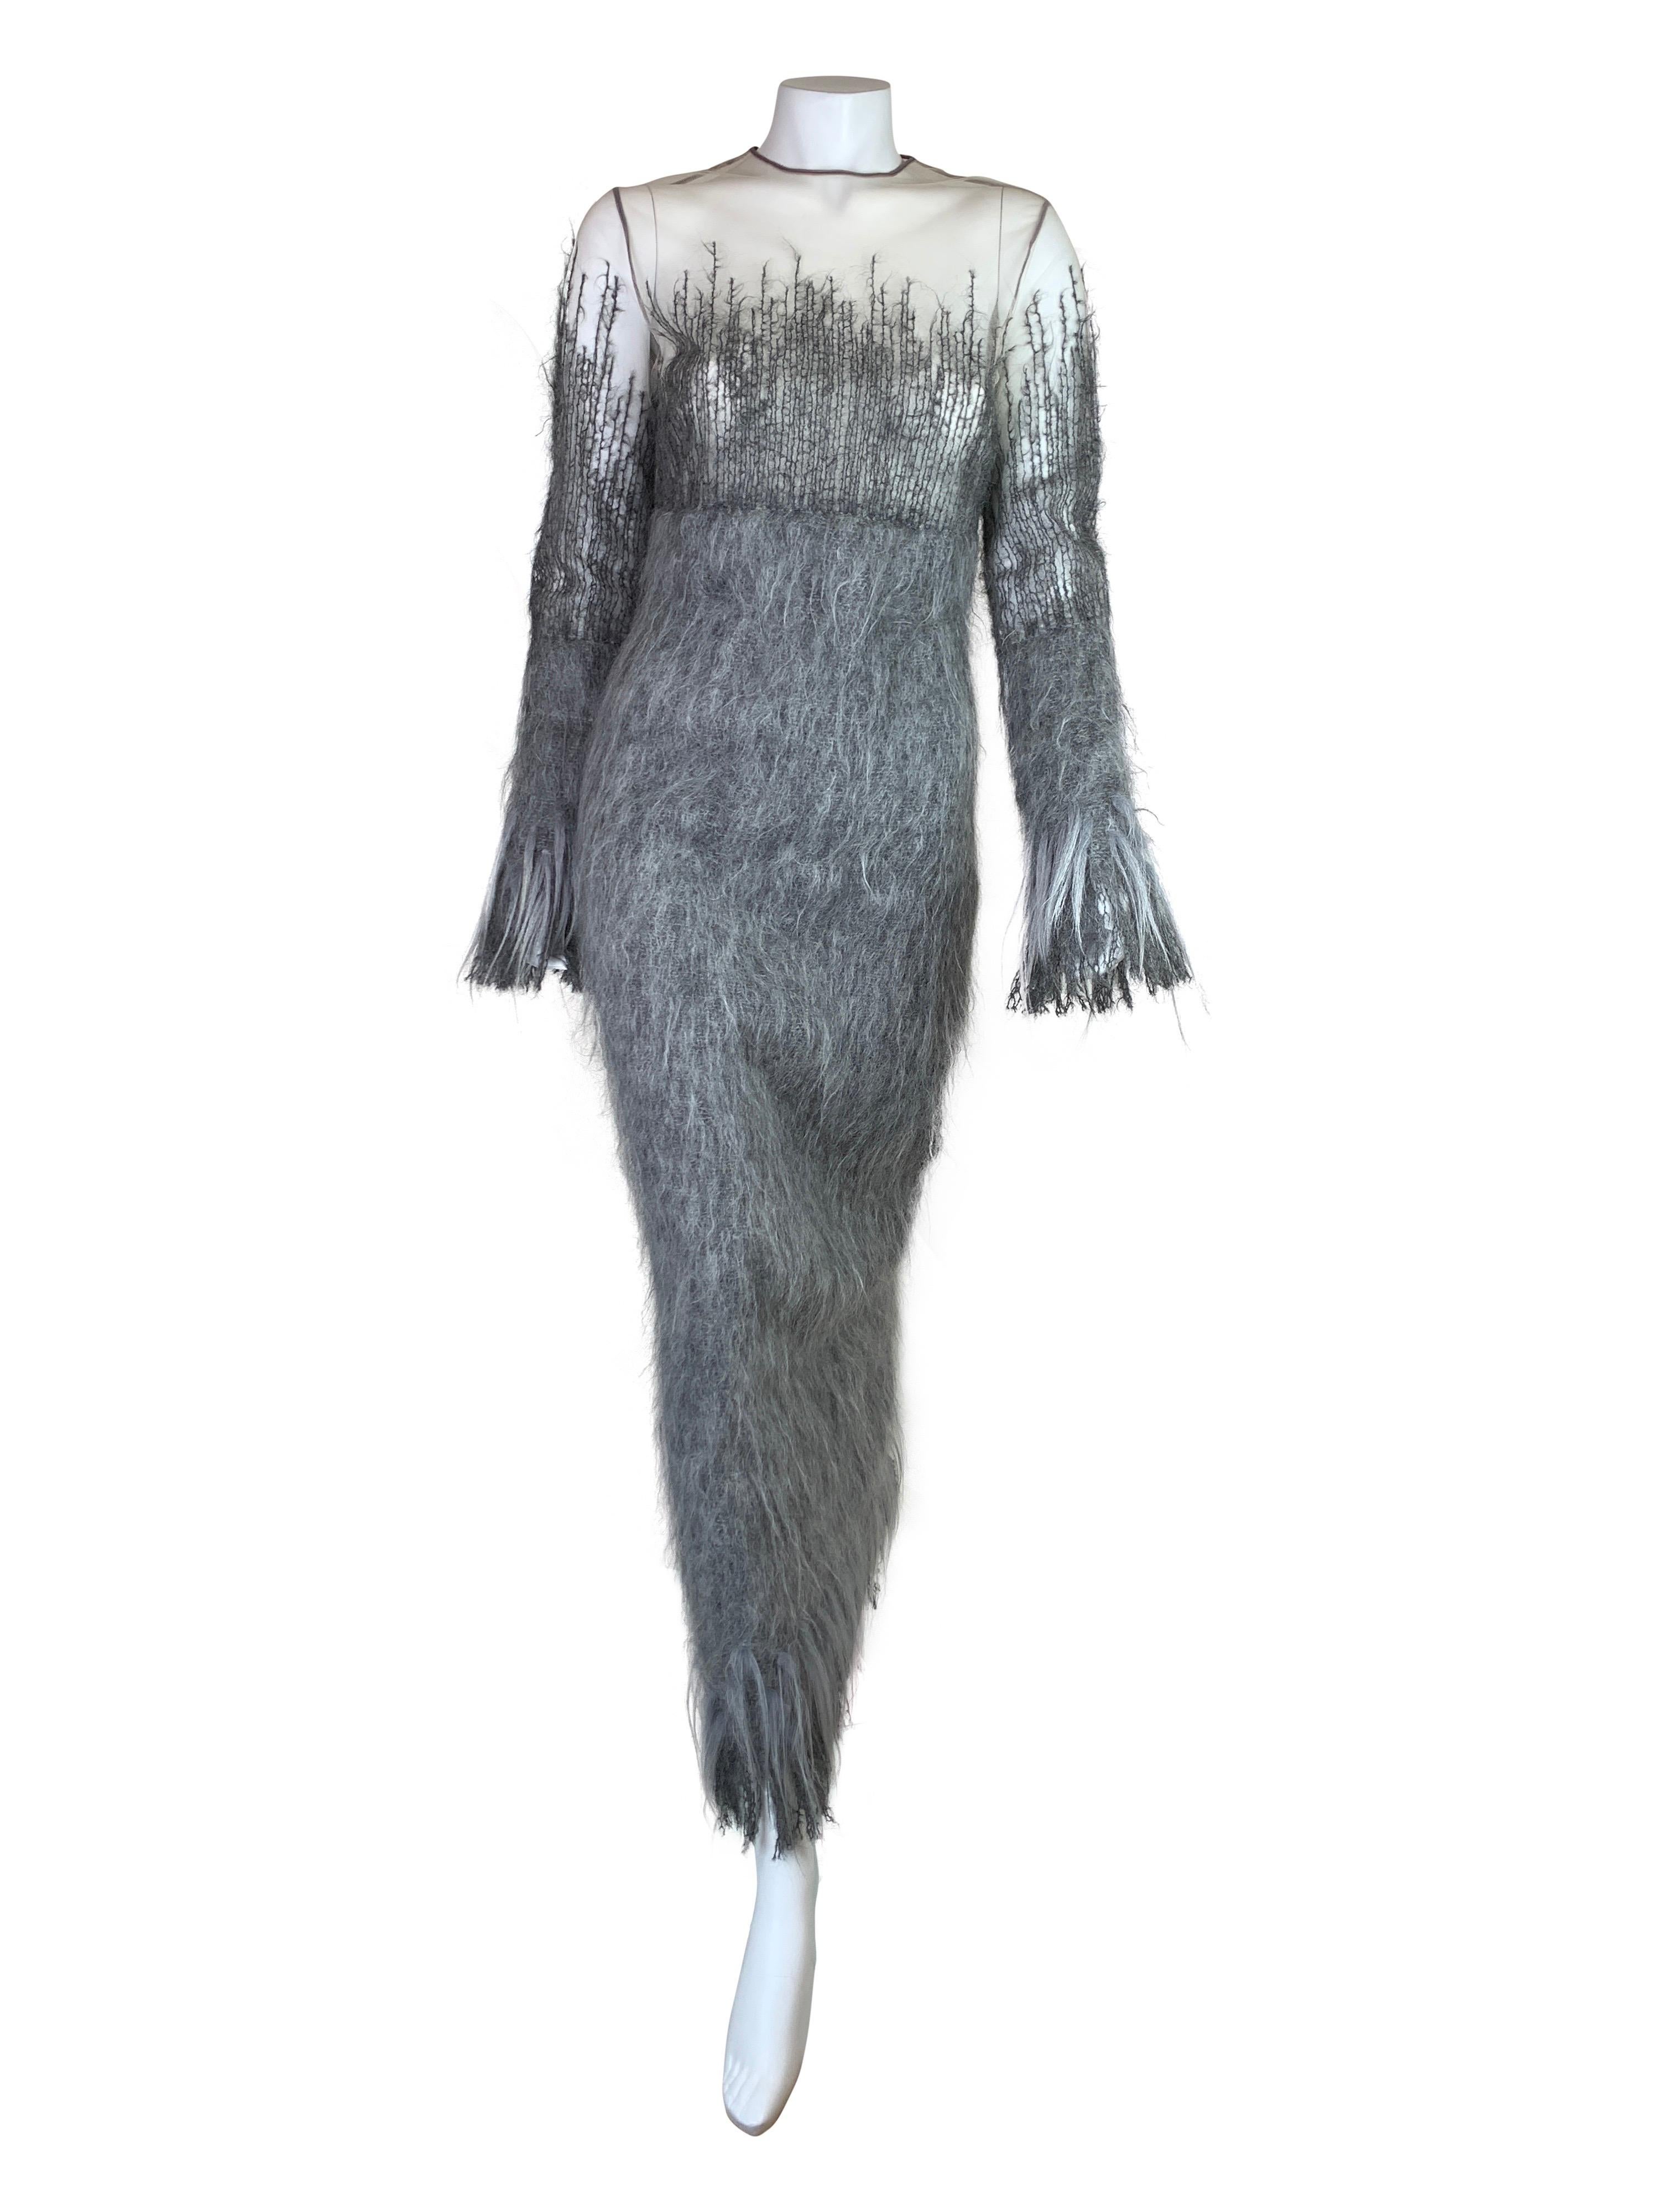 An absolutely stunning extravagant mohair dress from Gianfranco Ferré with tags still attached.

Size IT 42.

Measurements (flat lay on one side):

Shoulder to shoulder - 42 cm (16,5 in)
Armpit to armpit - 48 cm (19 in)
Waist - 42 cm (16,5 in) 
Hips